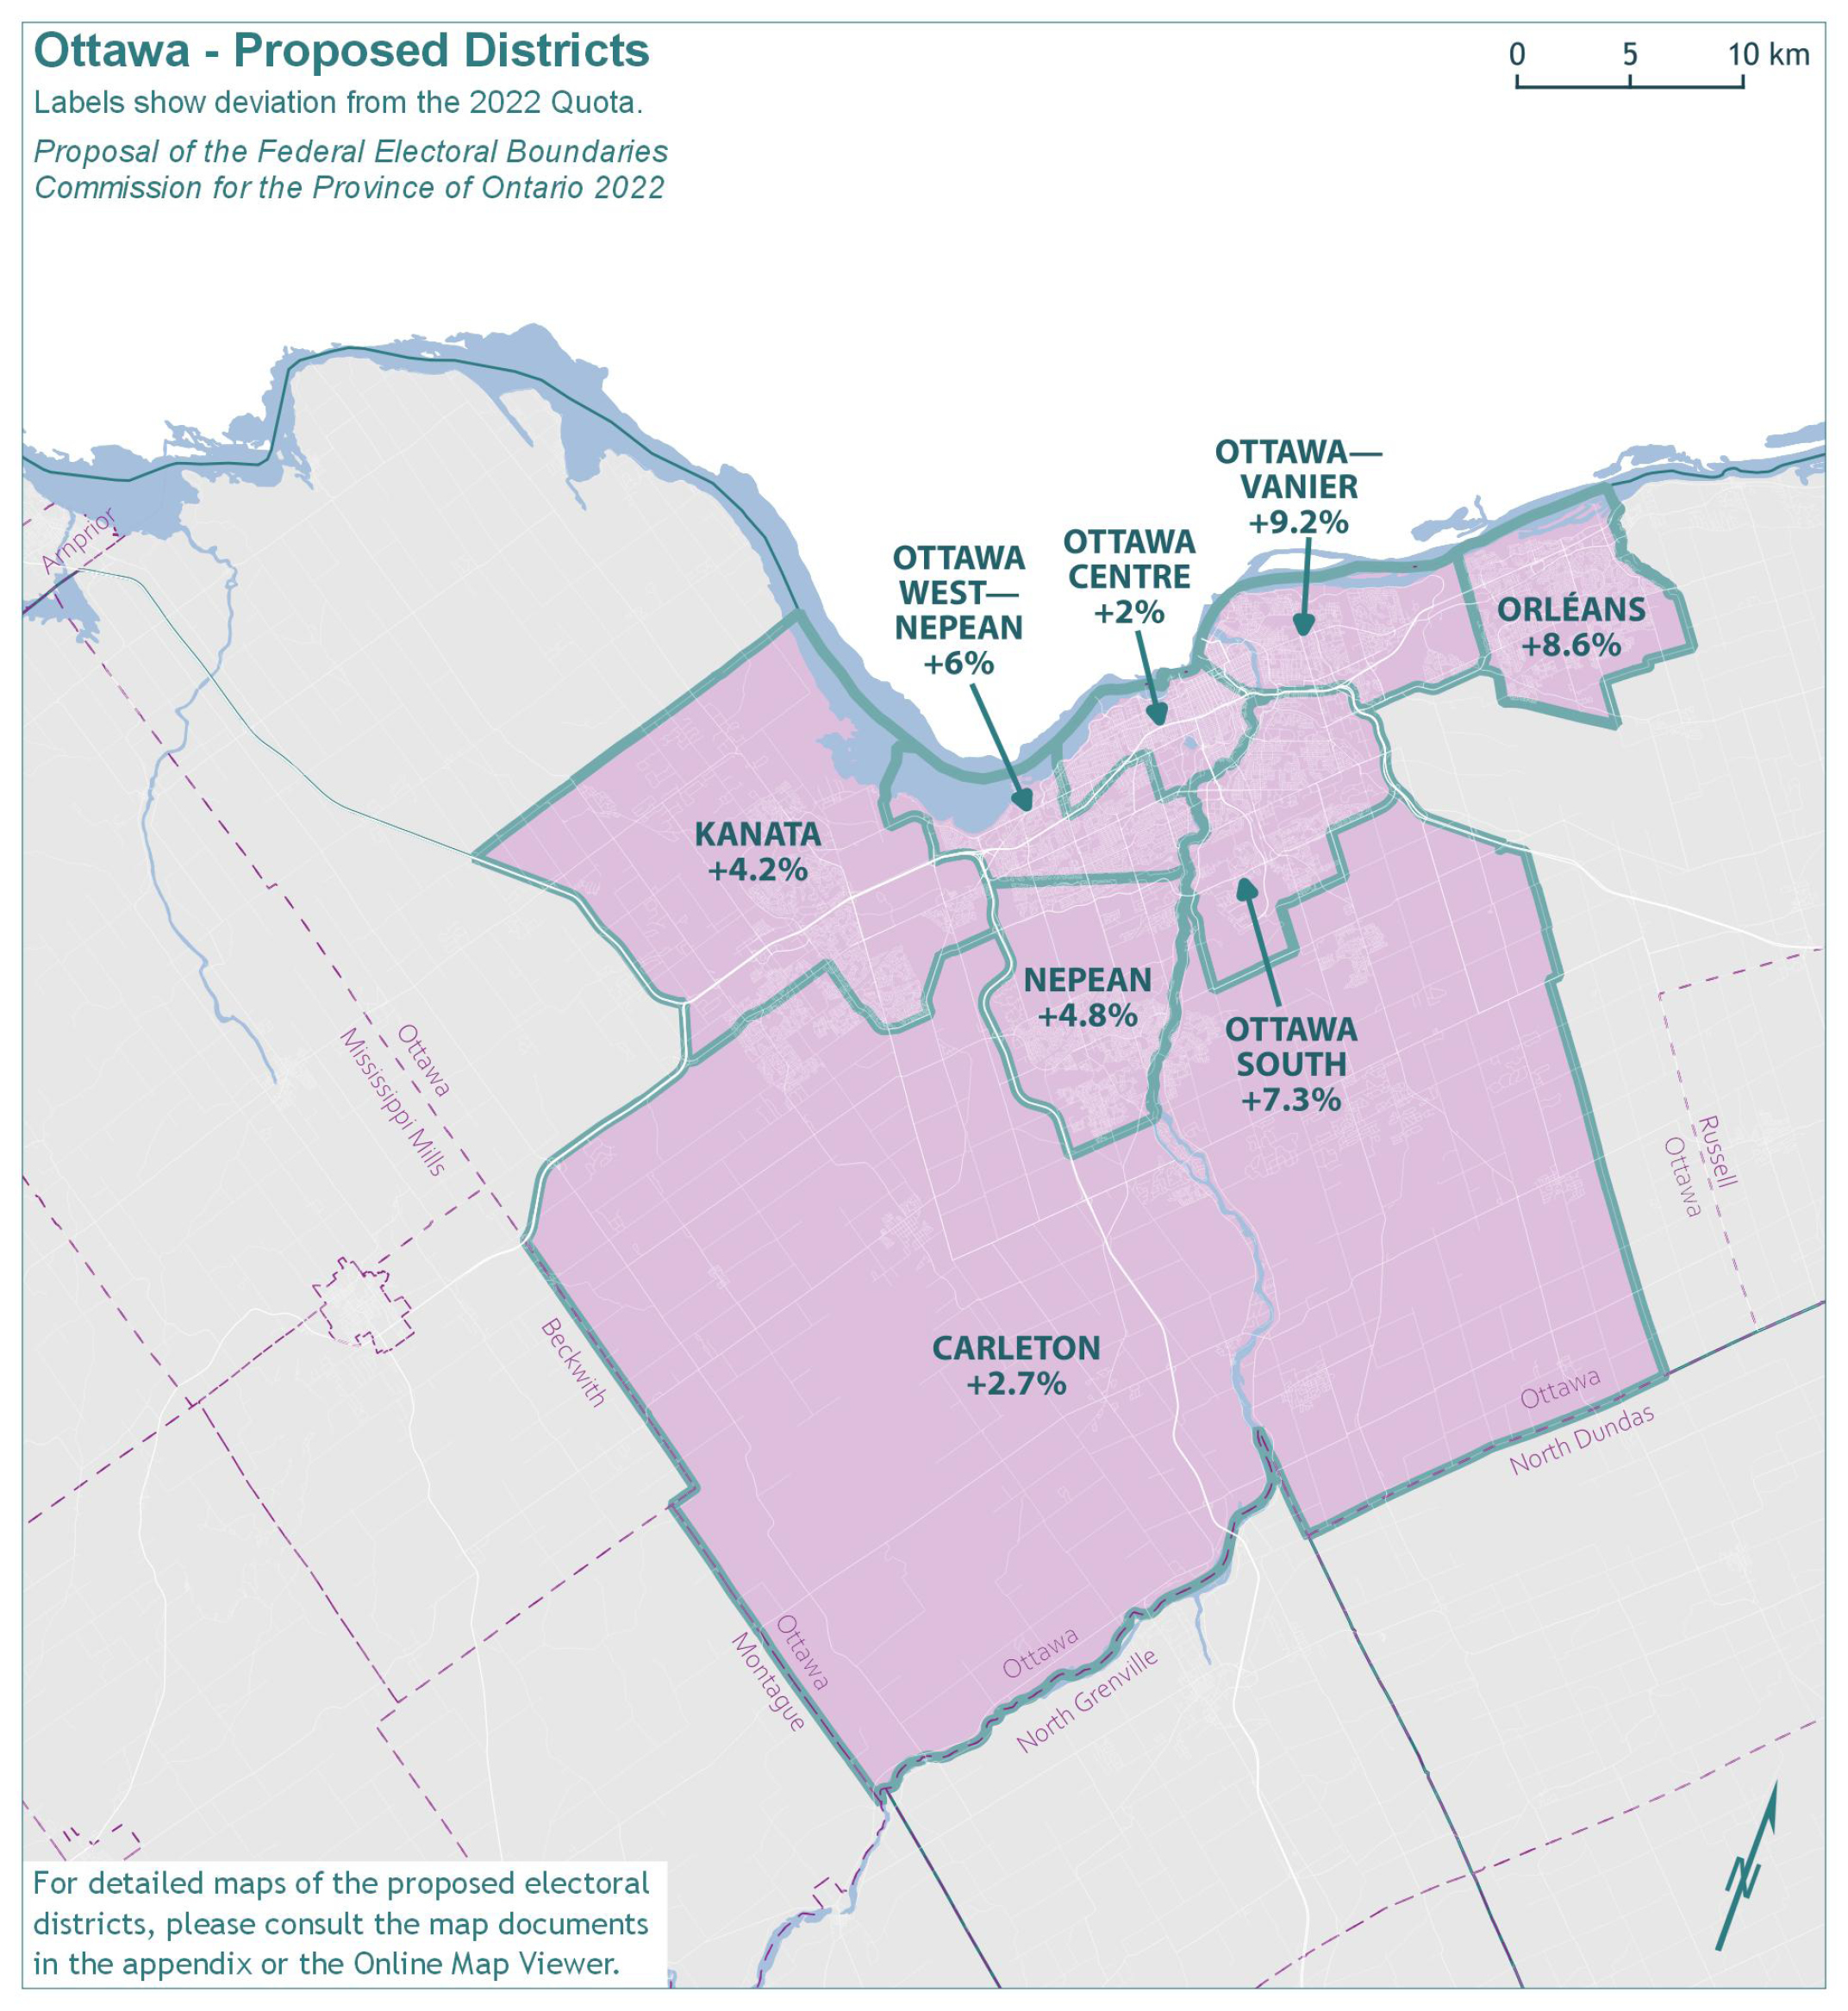 Ottawa - Proposed Districts 